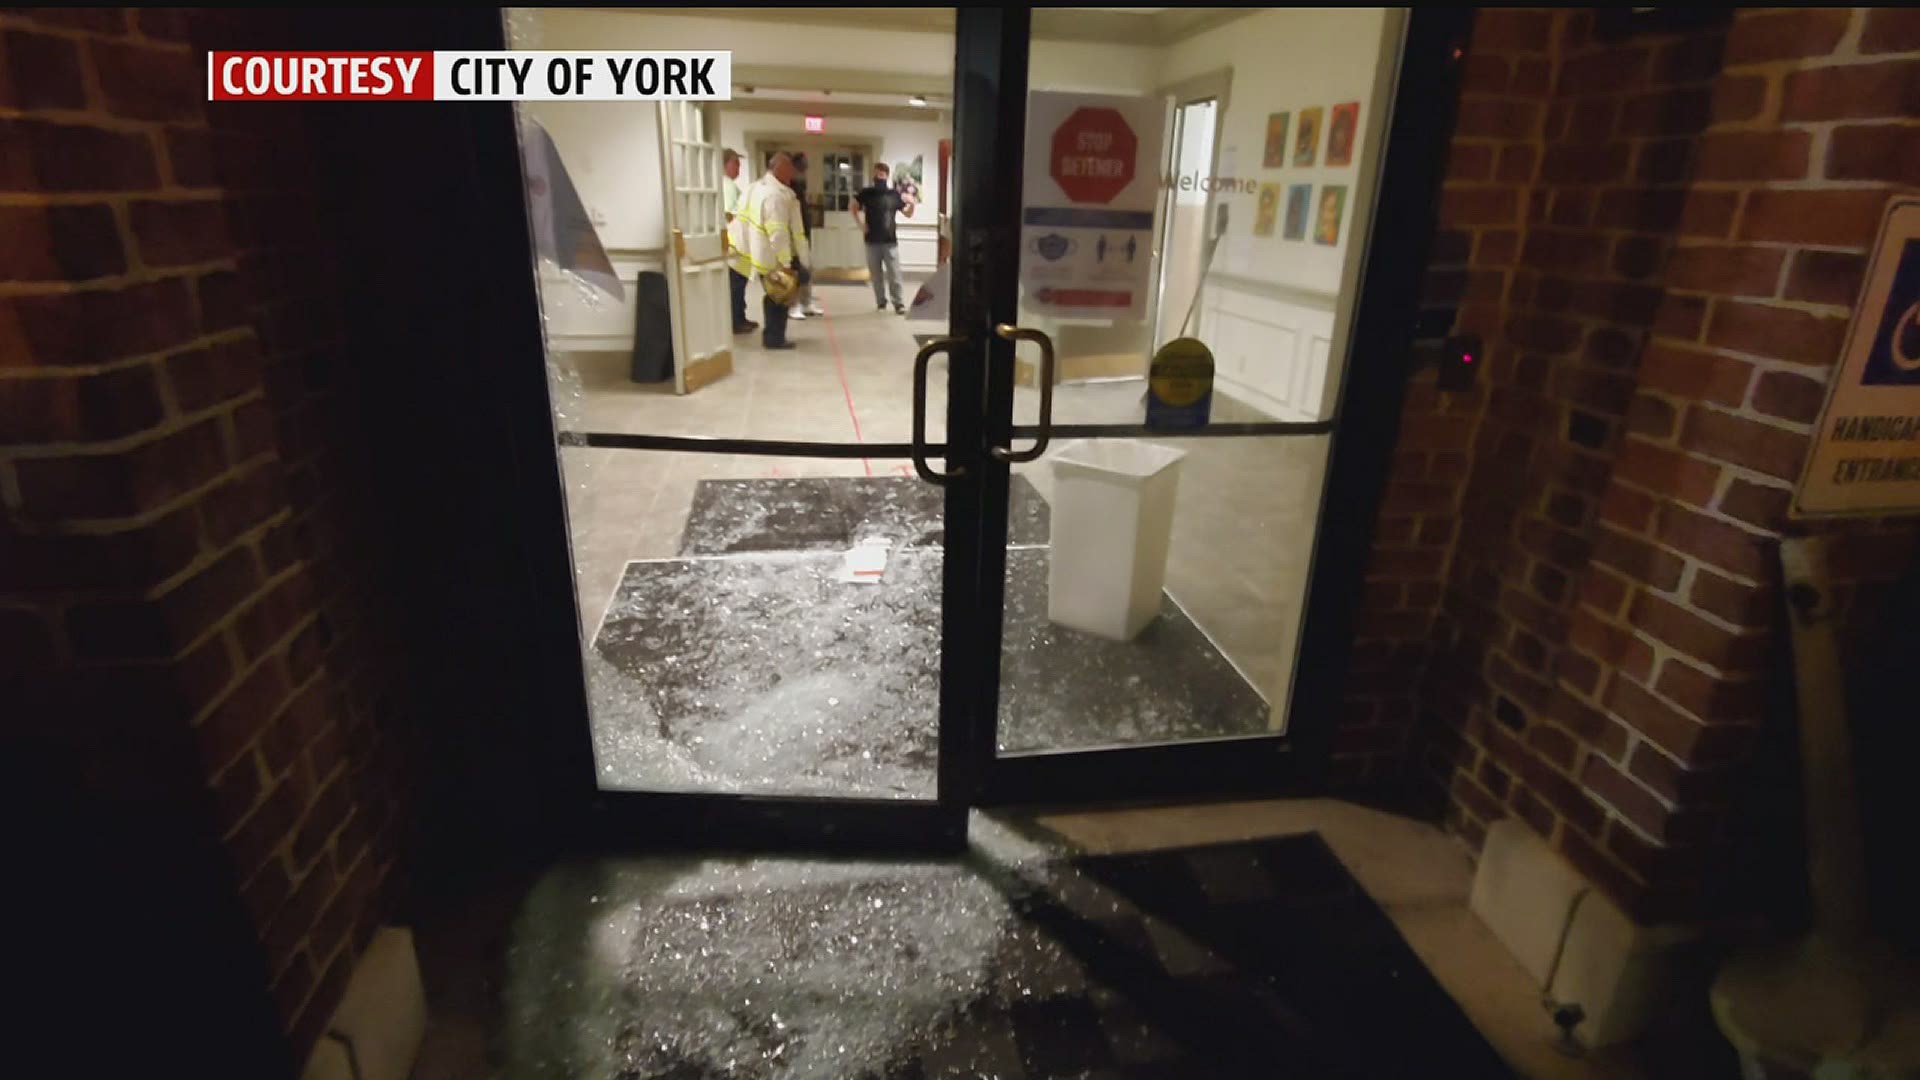 Glass shattered and equipment soaked, police say one man caused destruction inside York City Hall.